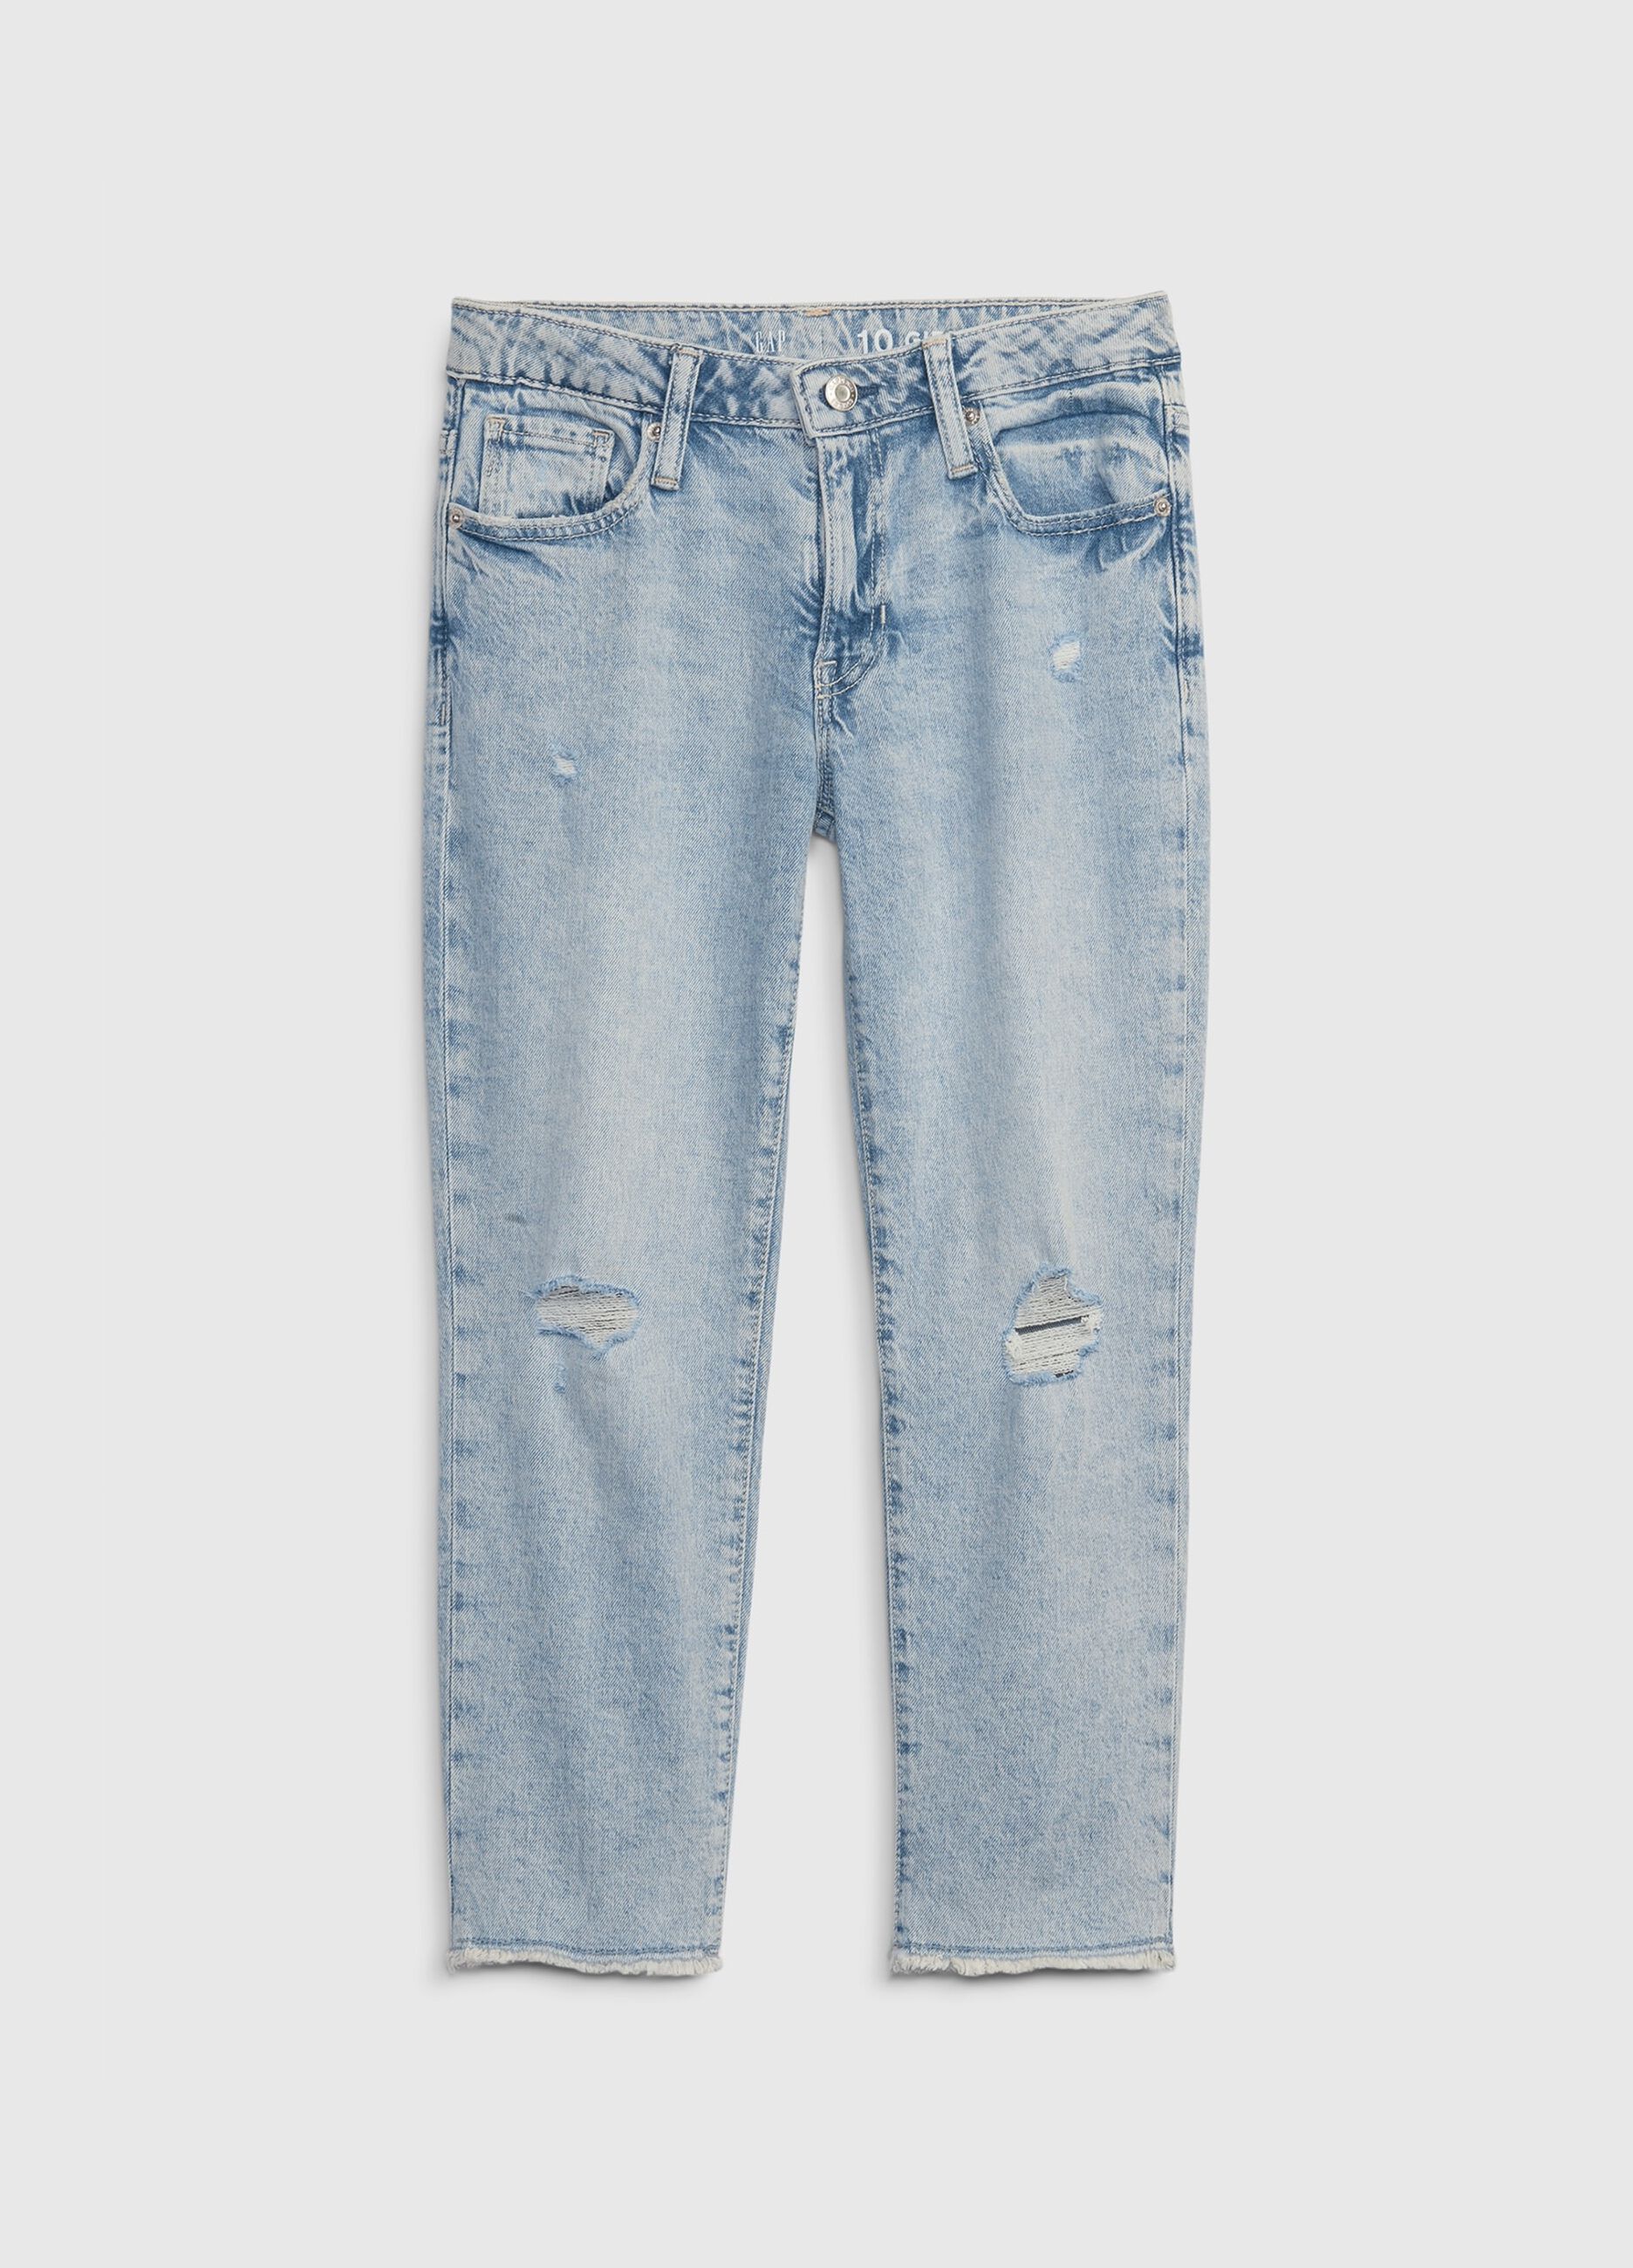 Mid-rise girlfriend jeans with worn look